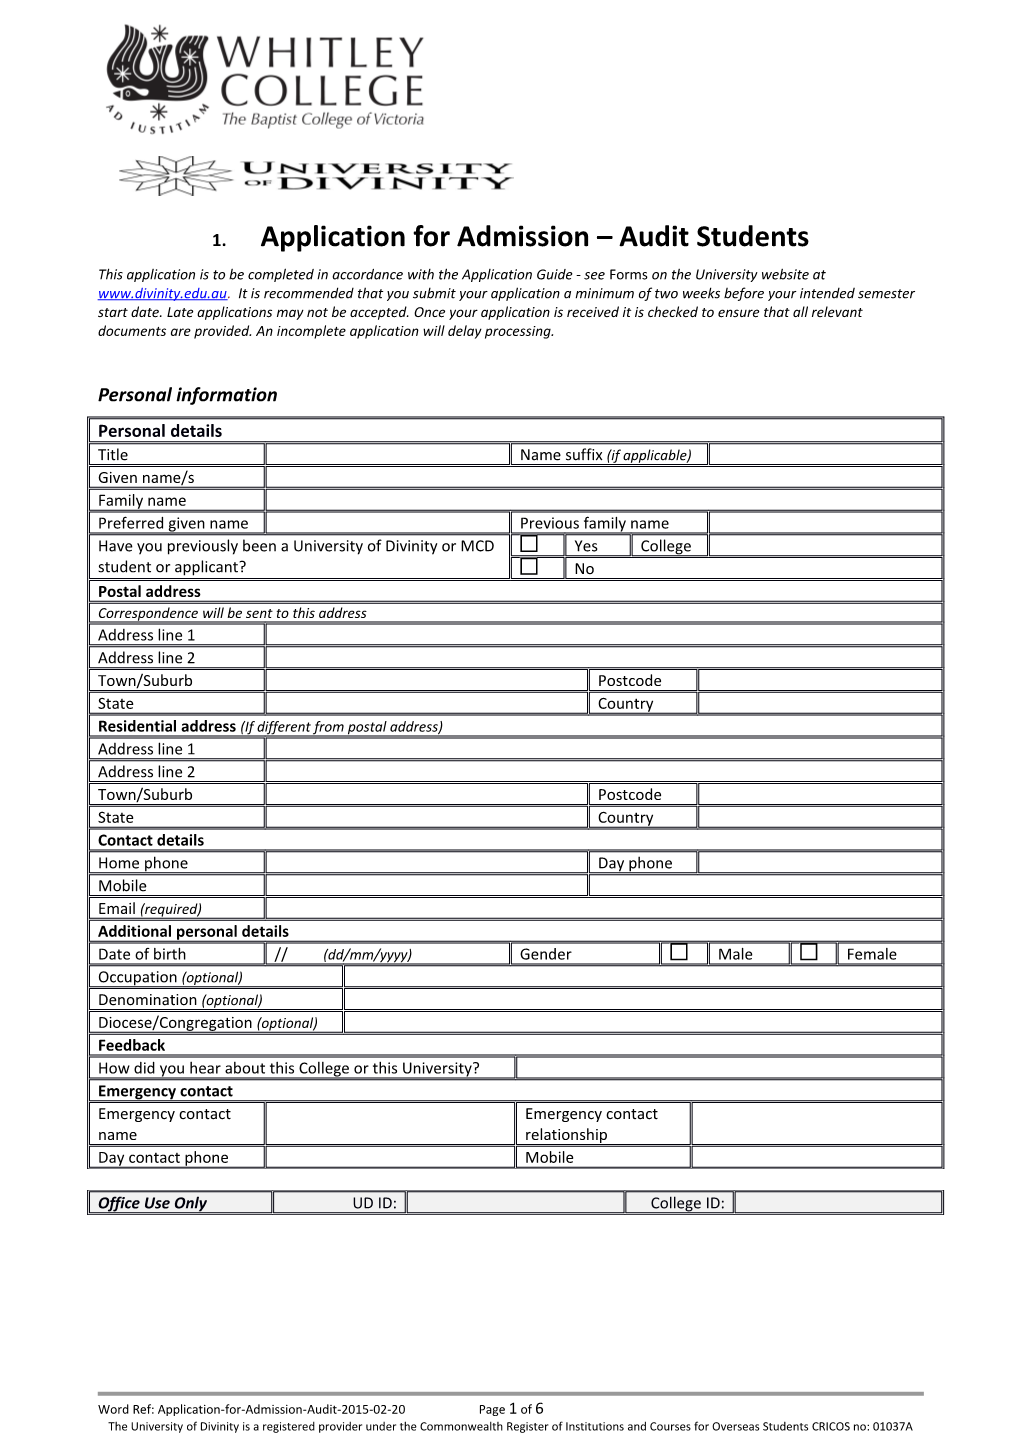 Application for Admission Audit Students